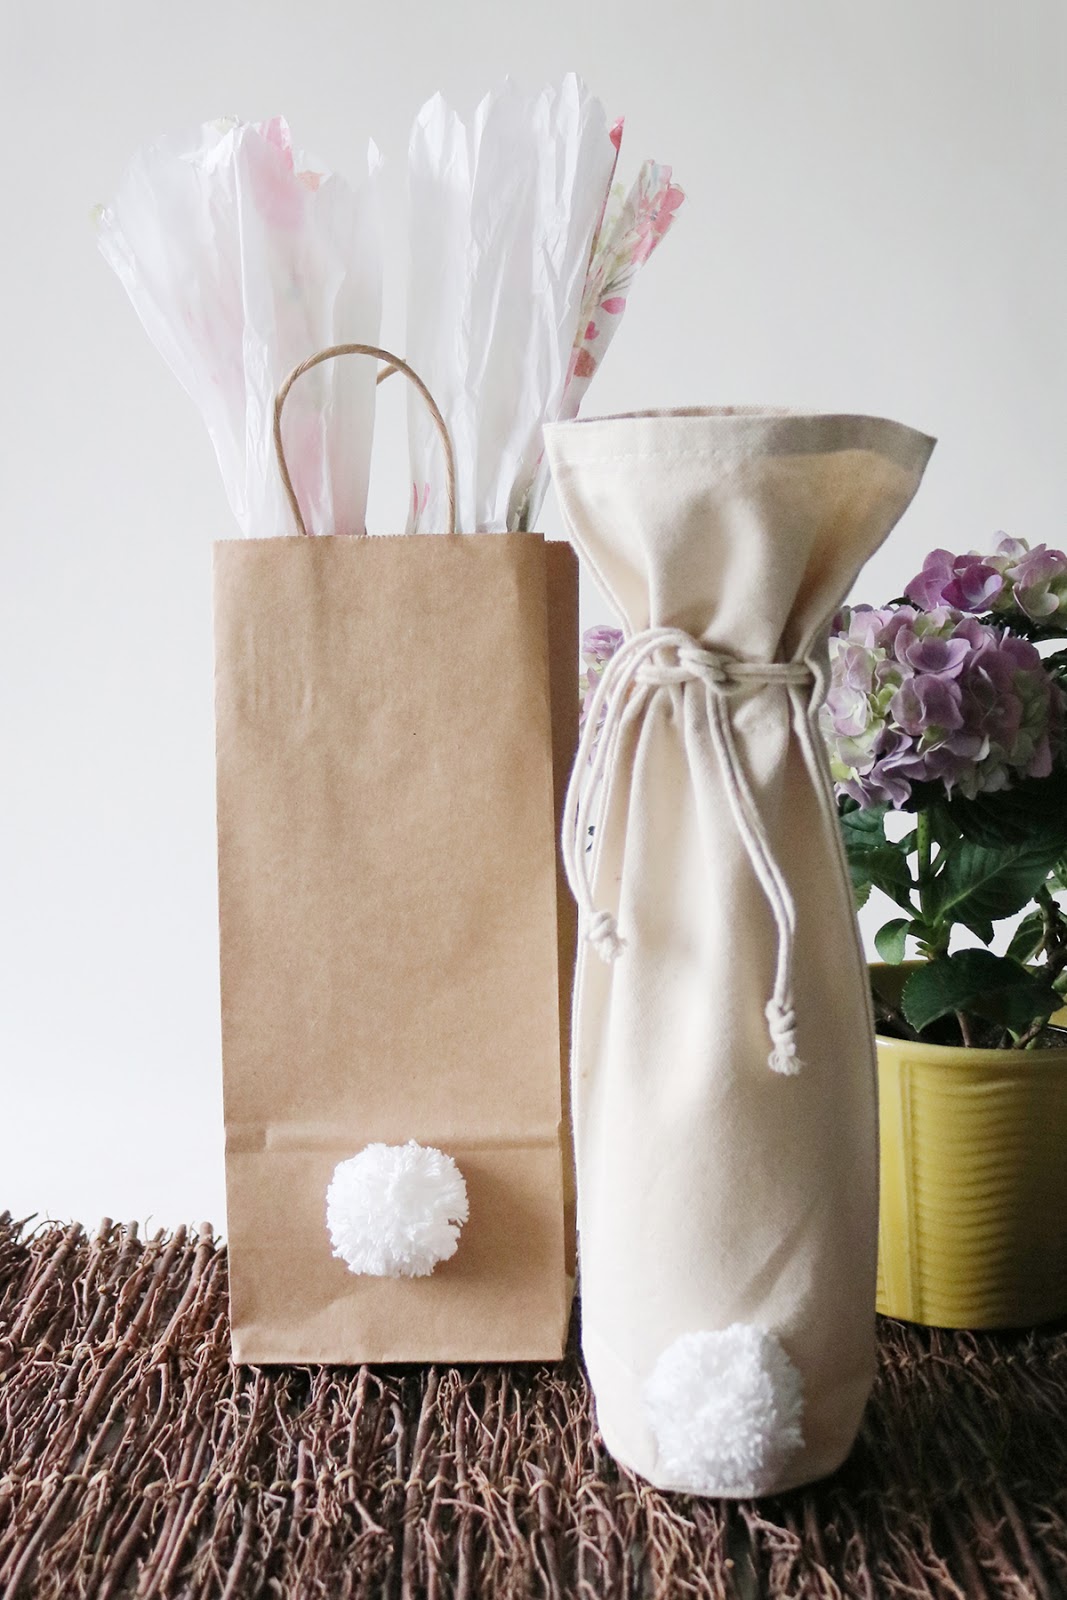 Easter gift bag inspiration - pom poms, tissue paper bunny ears and paper bags | Creative Bag